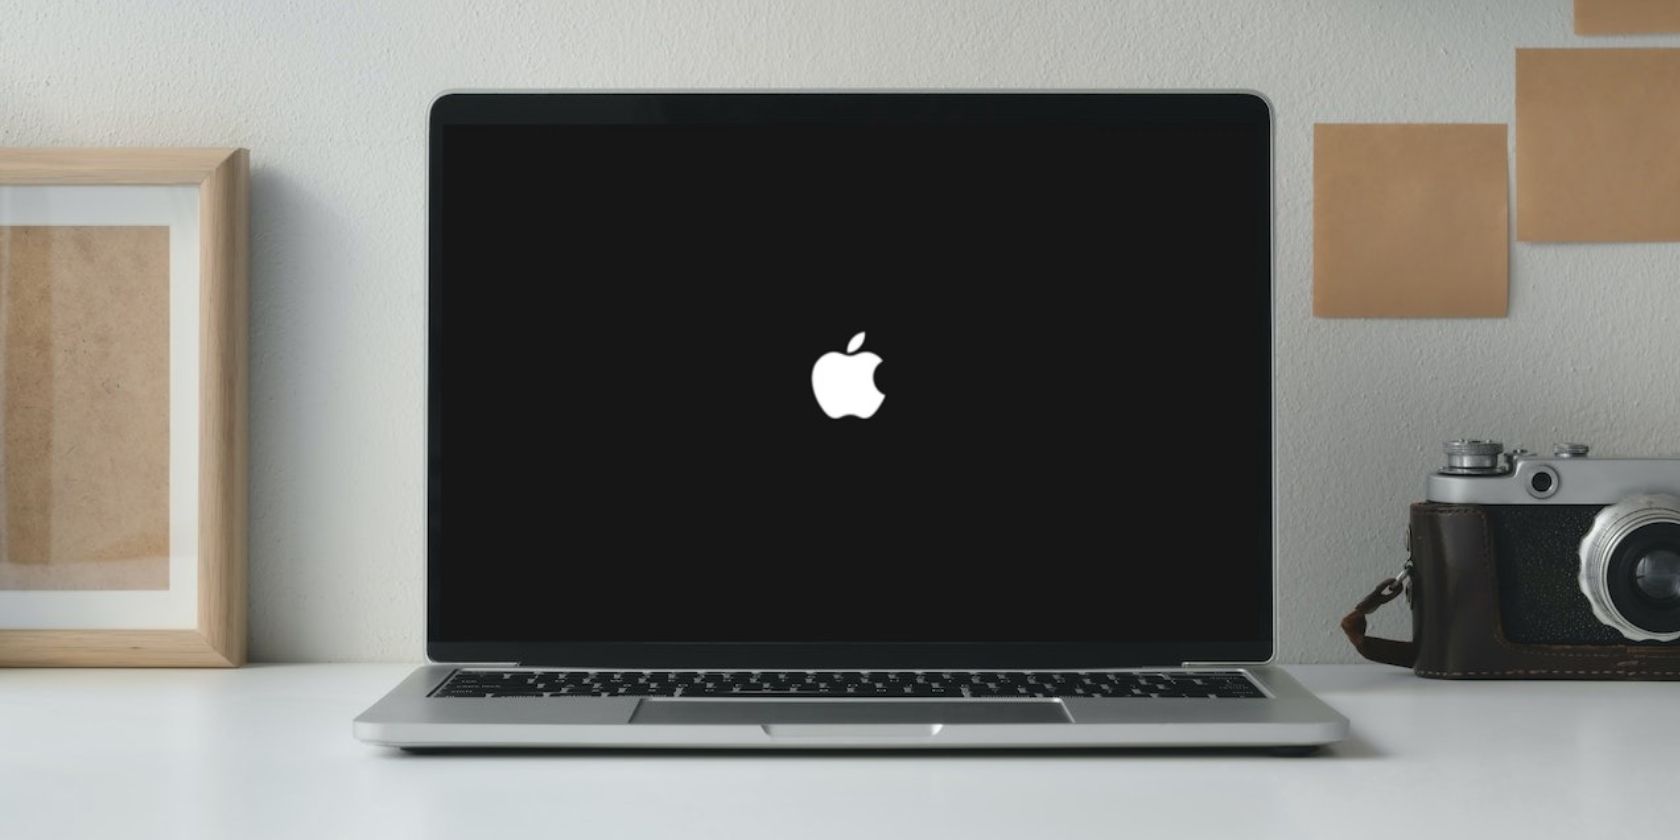 MacBook on a table with the Apple logo on screen